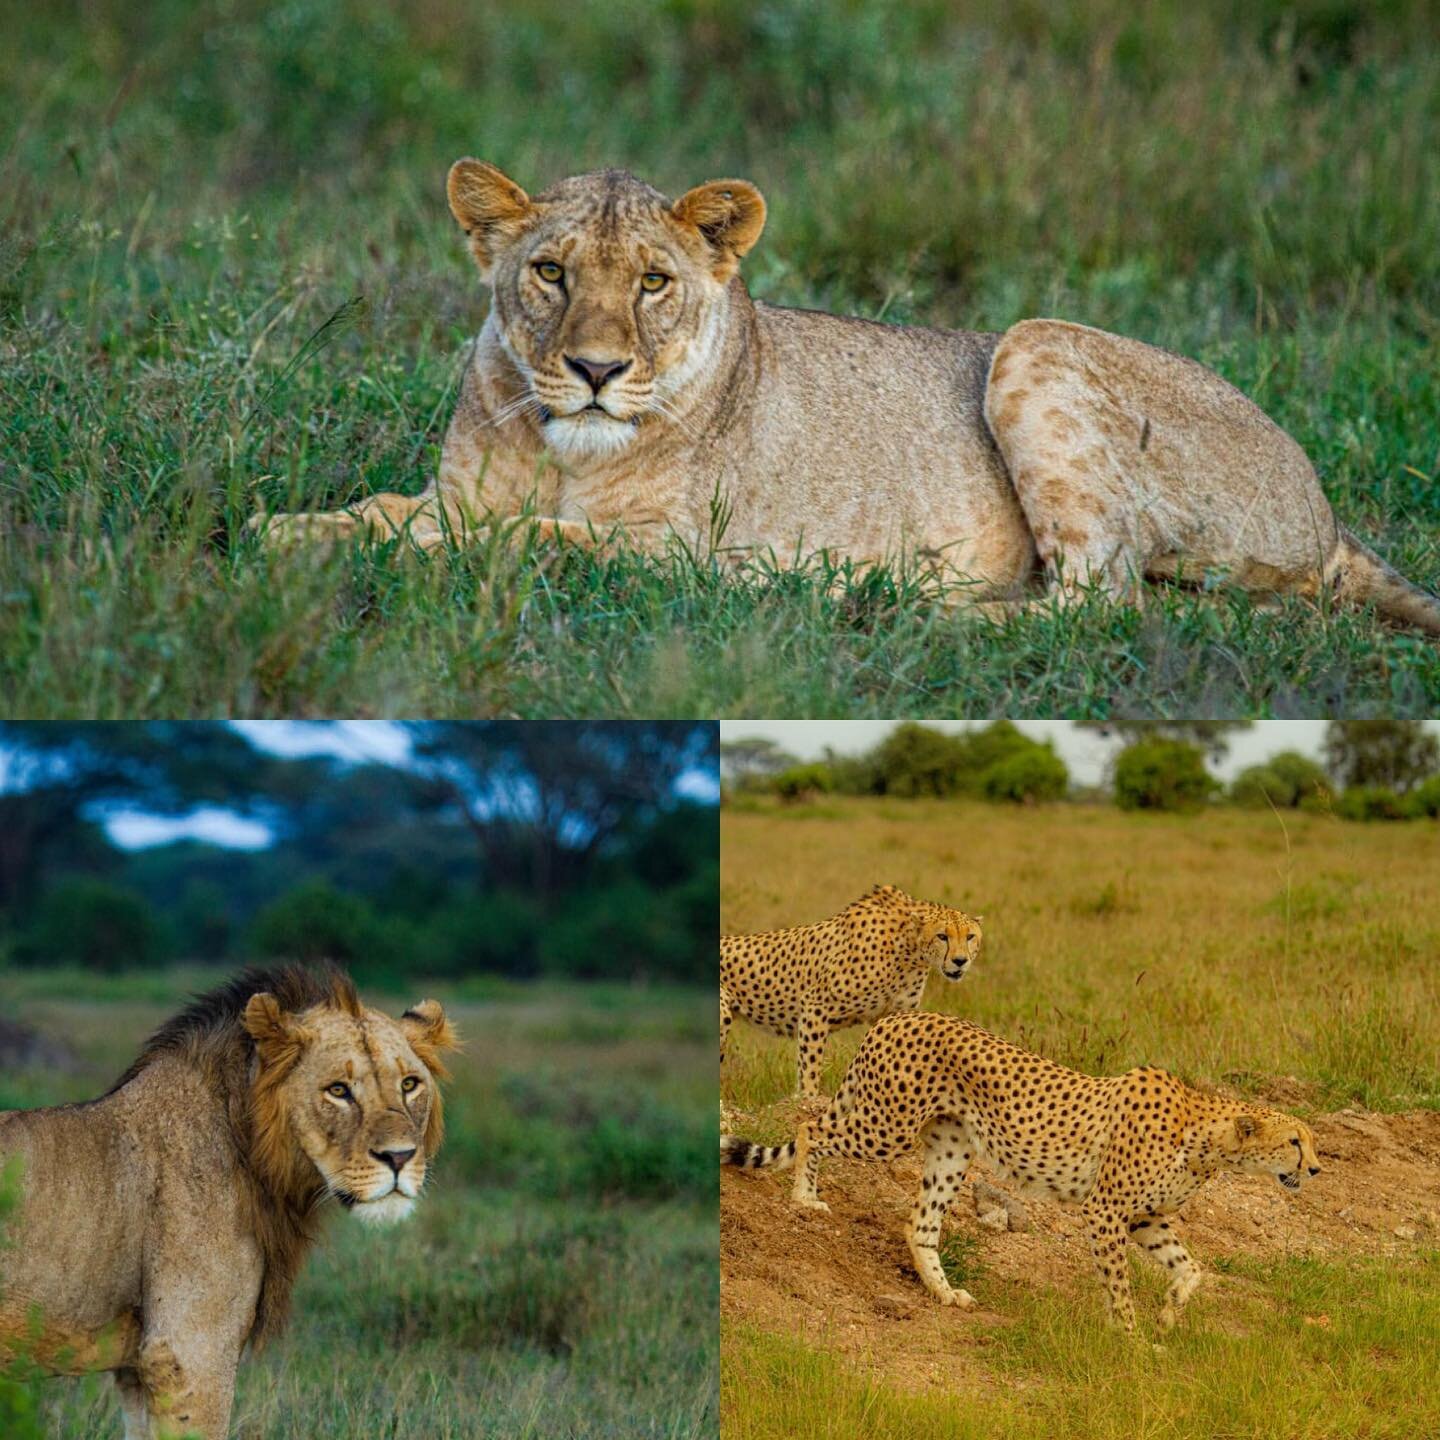 We&rsquo;re famed for our large elephant herds but we have lots of Big Cats too 🦁🐆

______________
www.tawilodge.com
______________

#safari #wildlife #lion #cheetahforever #bigcats #amboseli #magicalkenya #wildlifephotography #wildernessculture #b